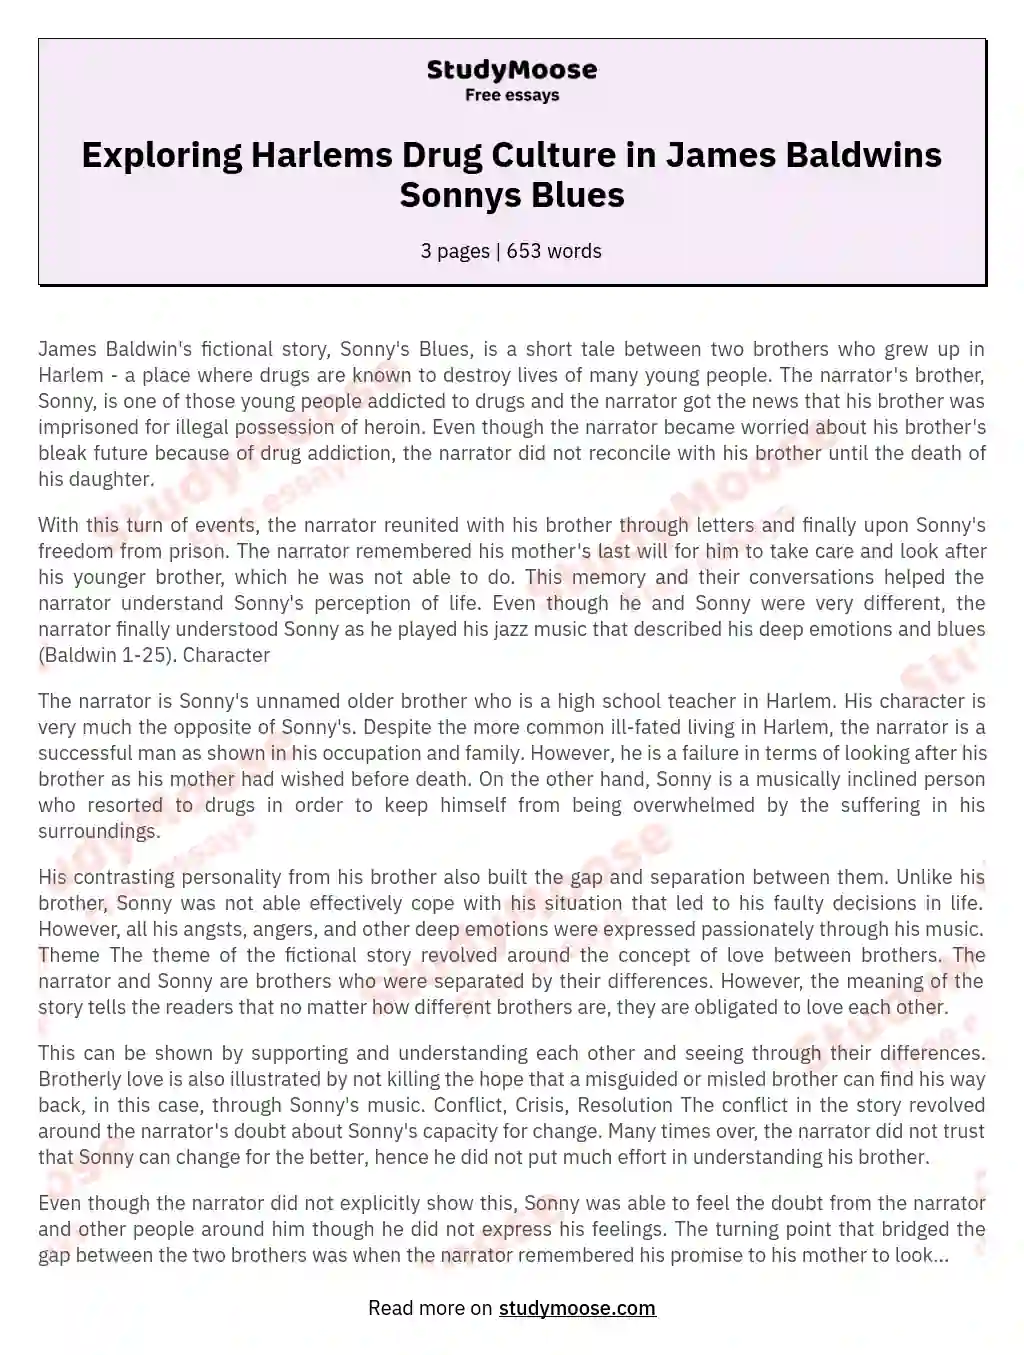 thesis statement examples for sonny's blues